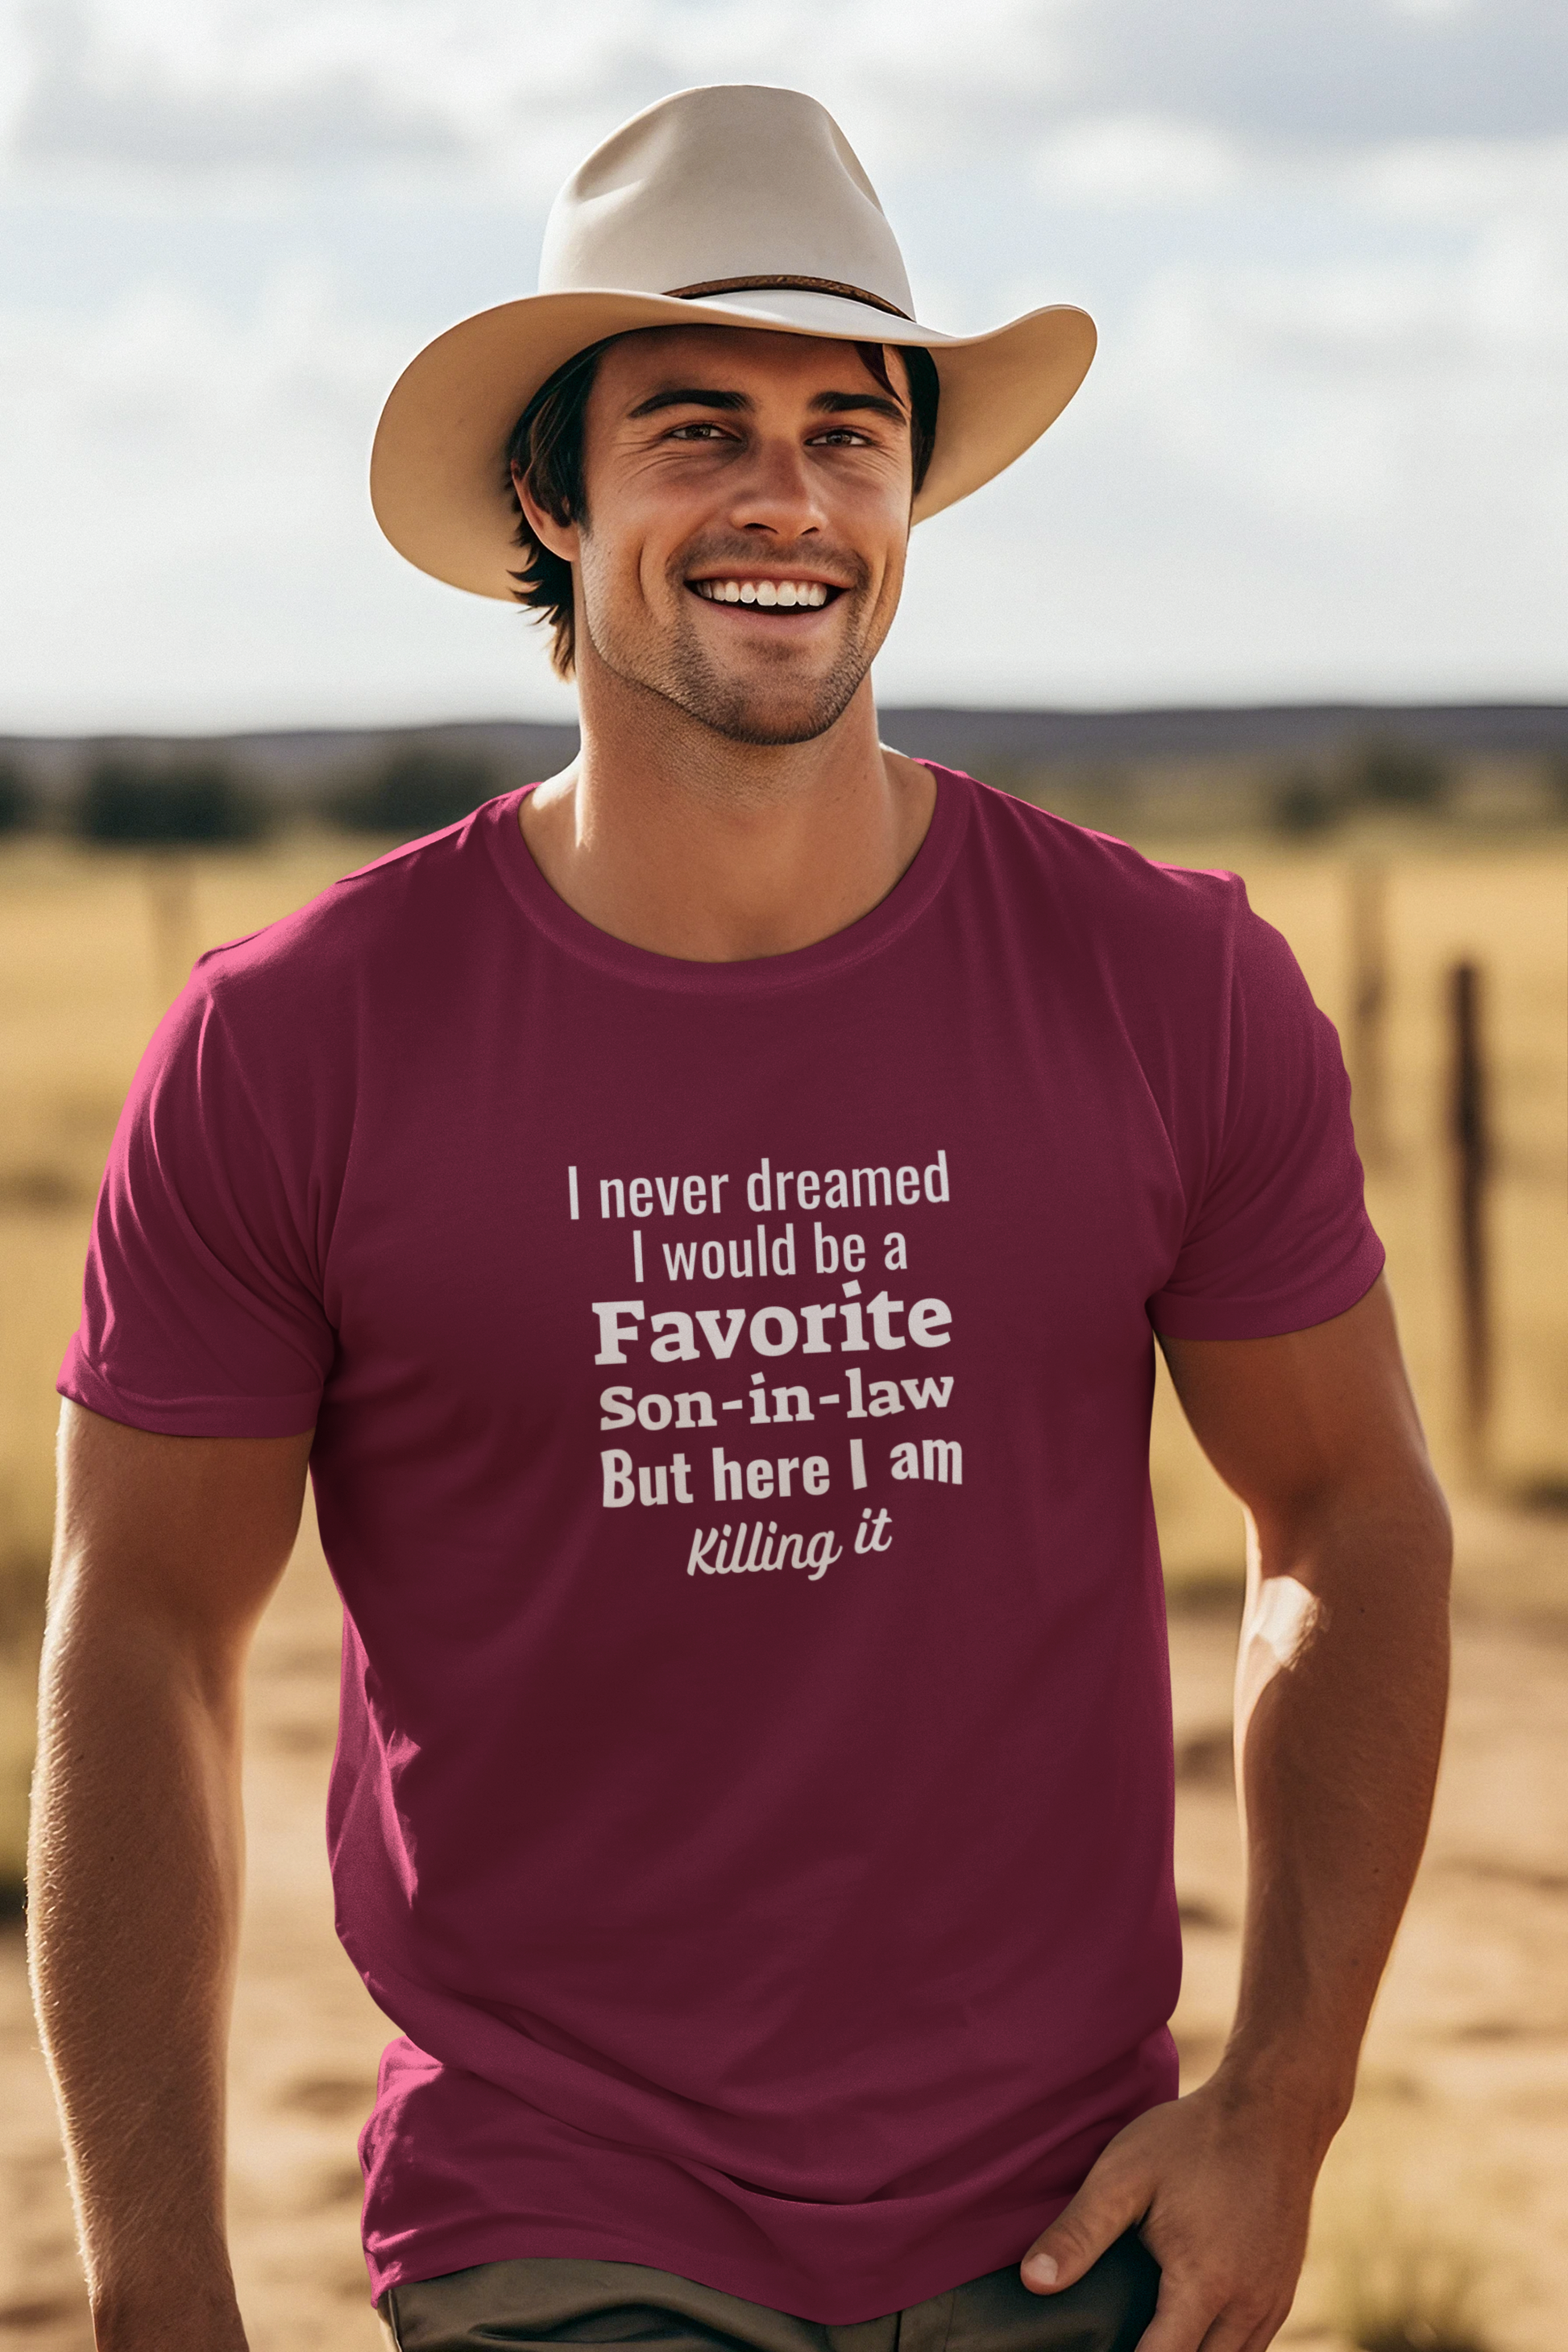 Get trendy with I never dreamed white text Favorite son-in-law front print, white text T-Shirt - T-Shirts available at Good Gift Company. Grab yours for $22.95 today!